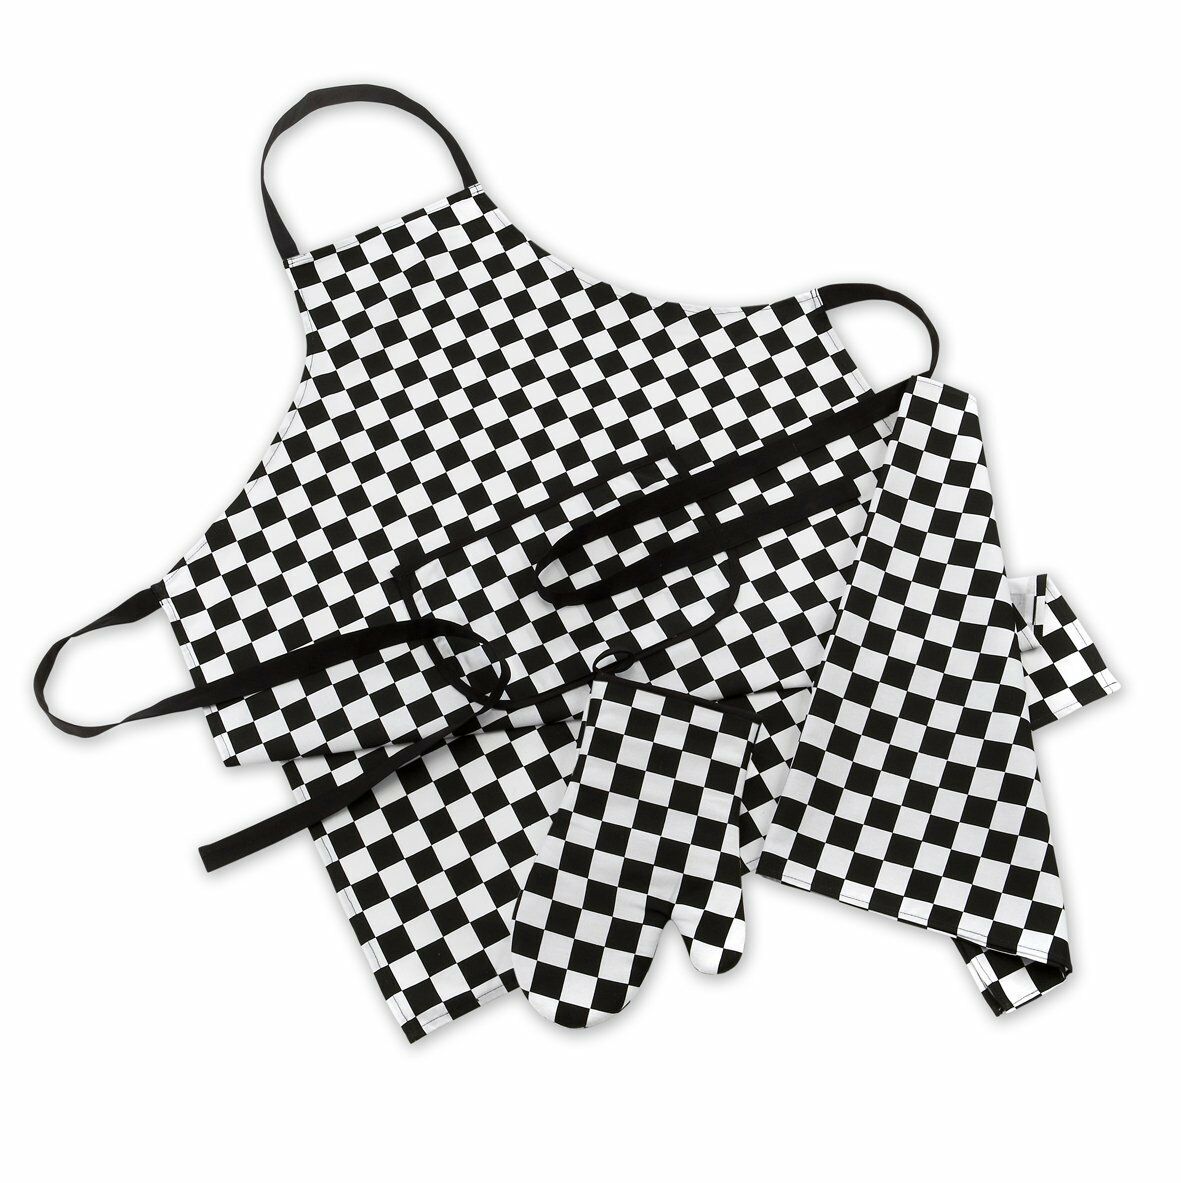 Mad About Cooking Set 3 Piece Chef Set Black White Checked Apron Tea Towel Gauntlet